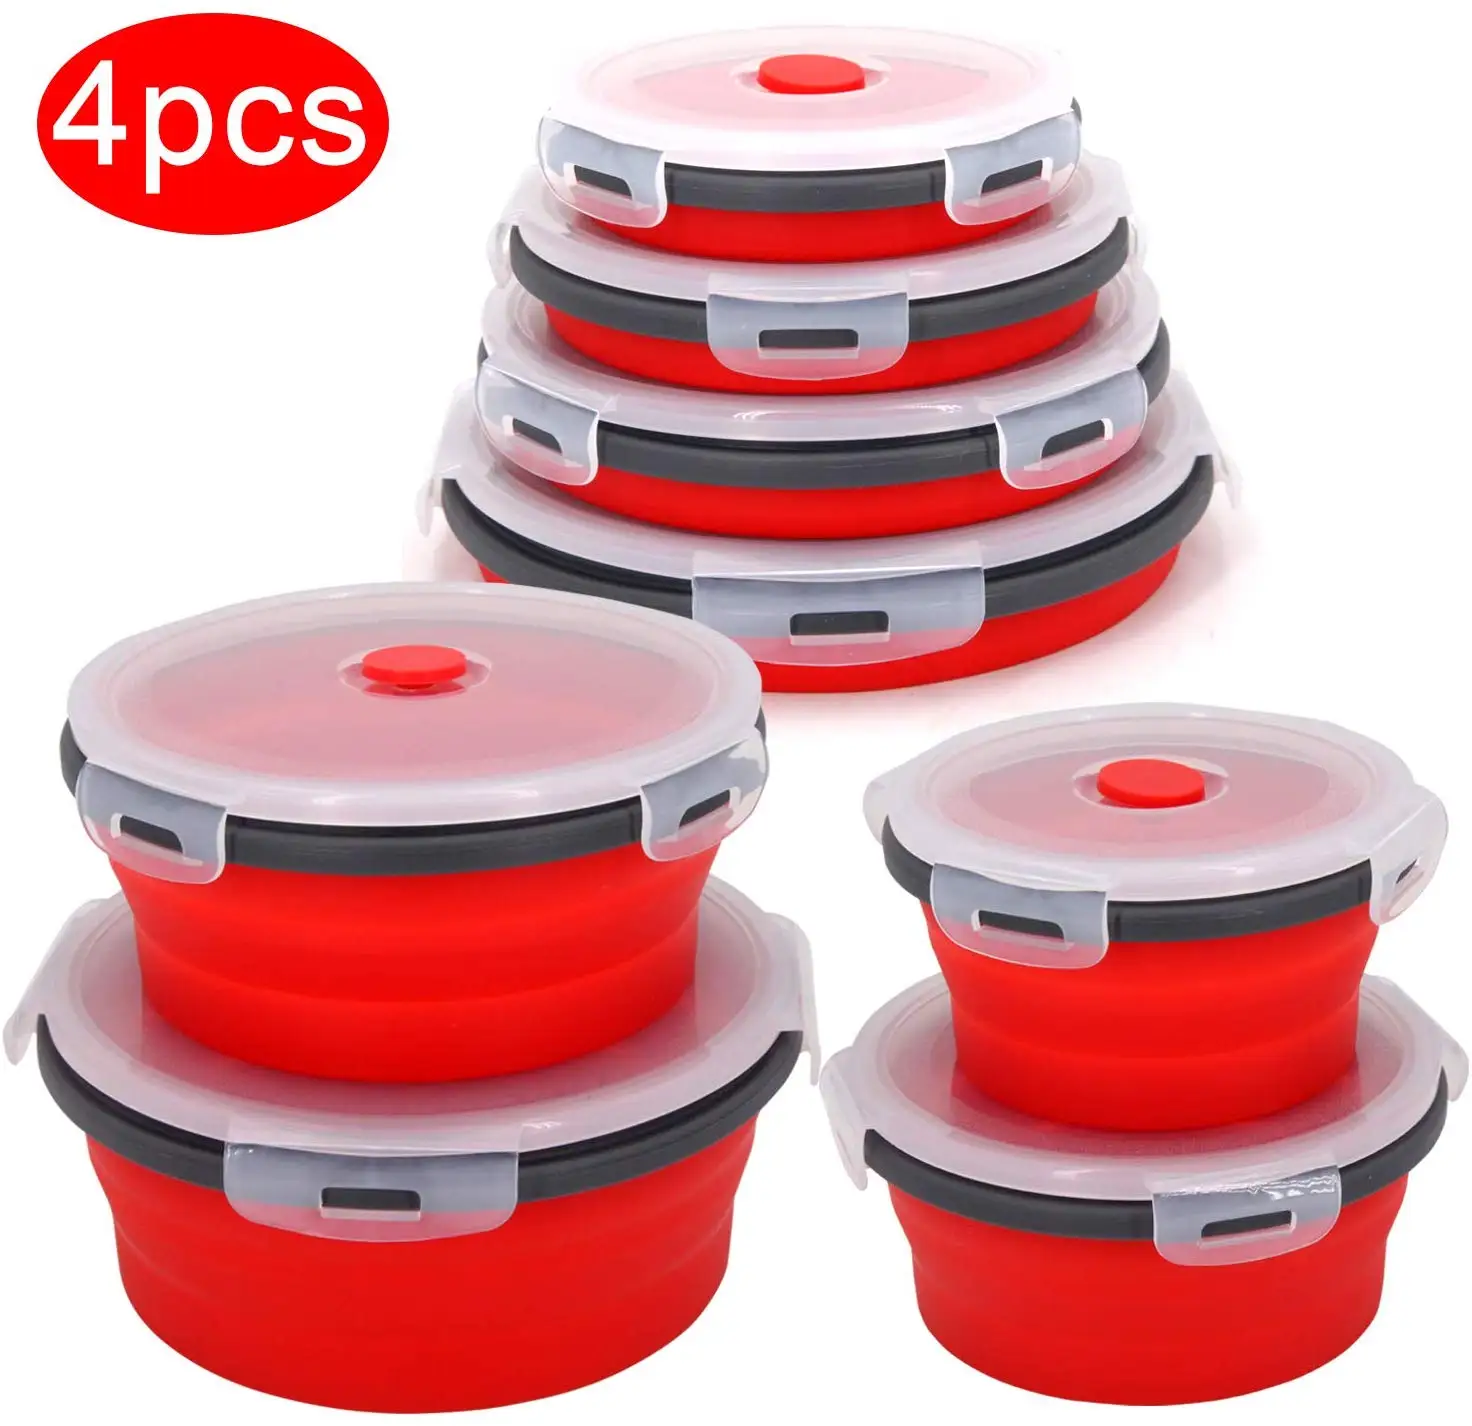 

Round Silicone Folding Lunch Box Set Microwave Folding Bowl Portable Folding Food Container Box Salad Snack Bowl With Lid